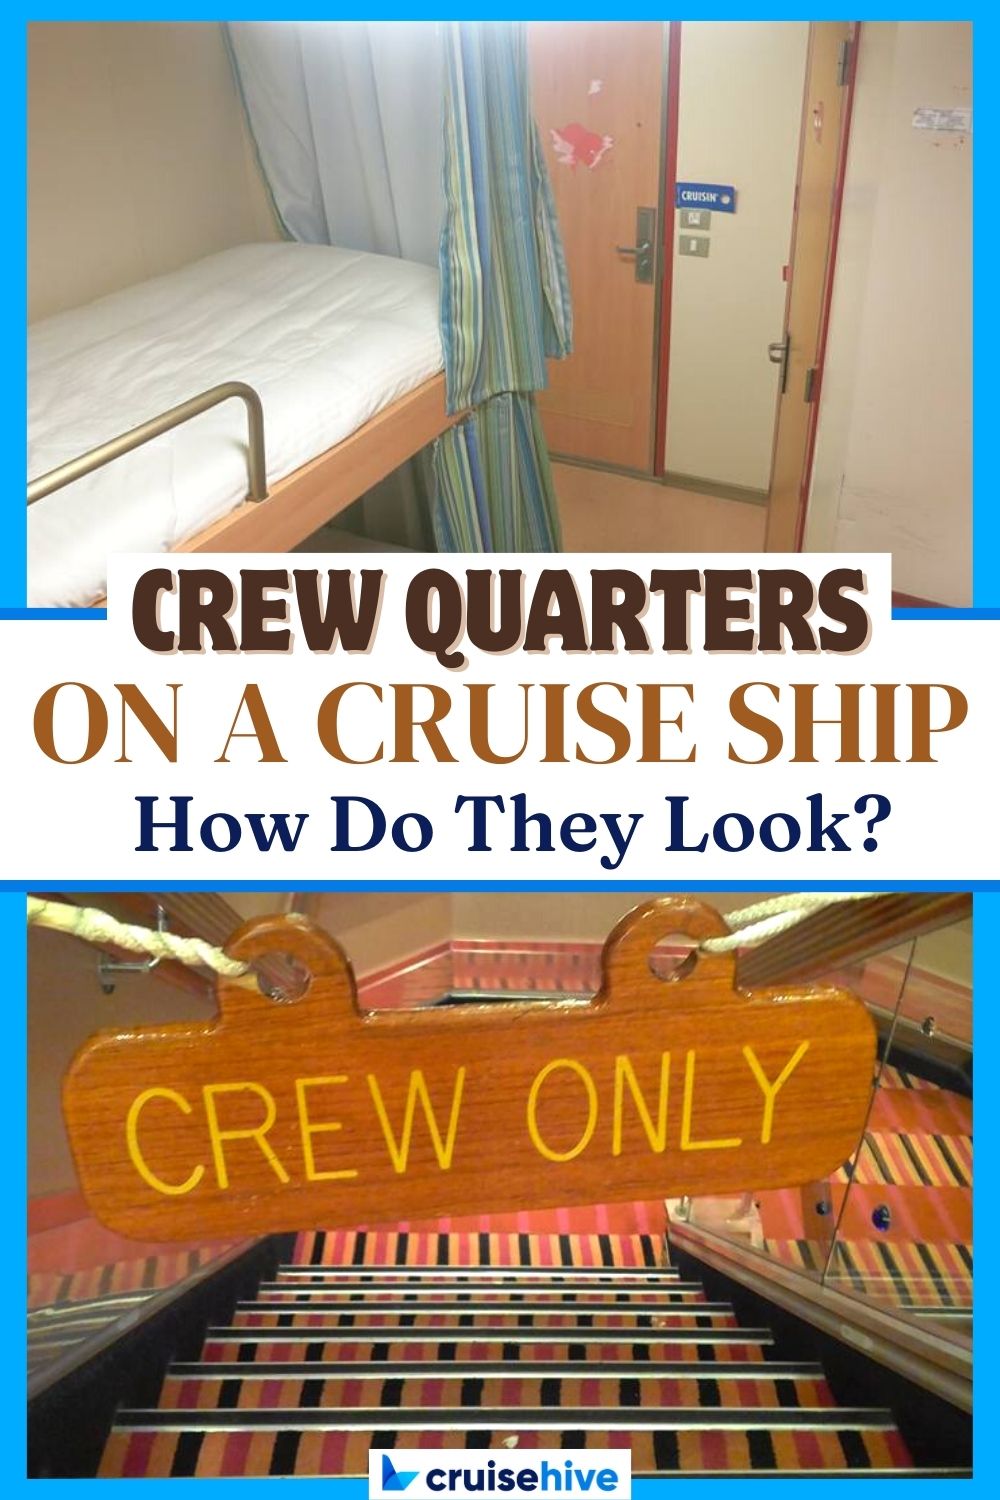 Crew Quarters on a Cruise Ship